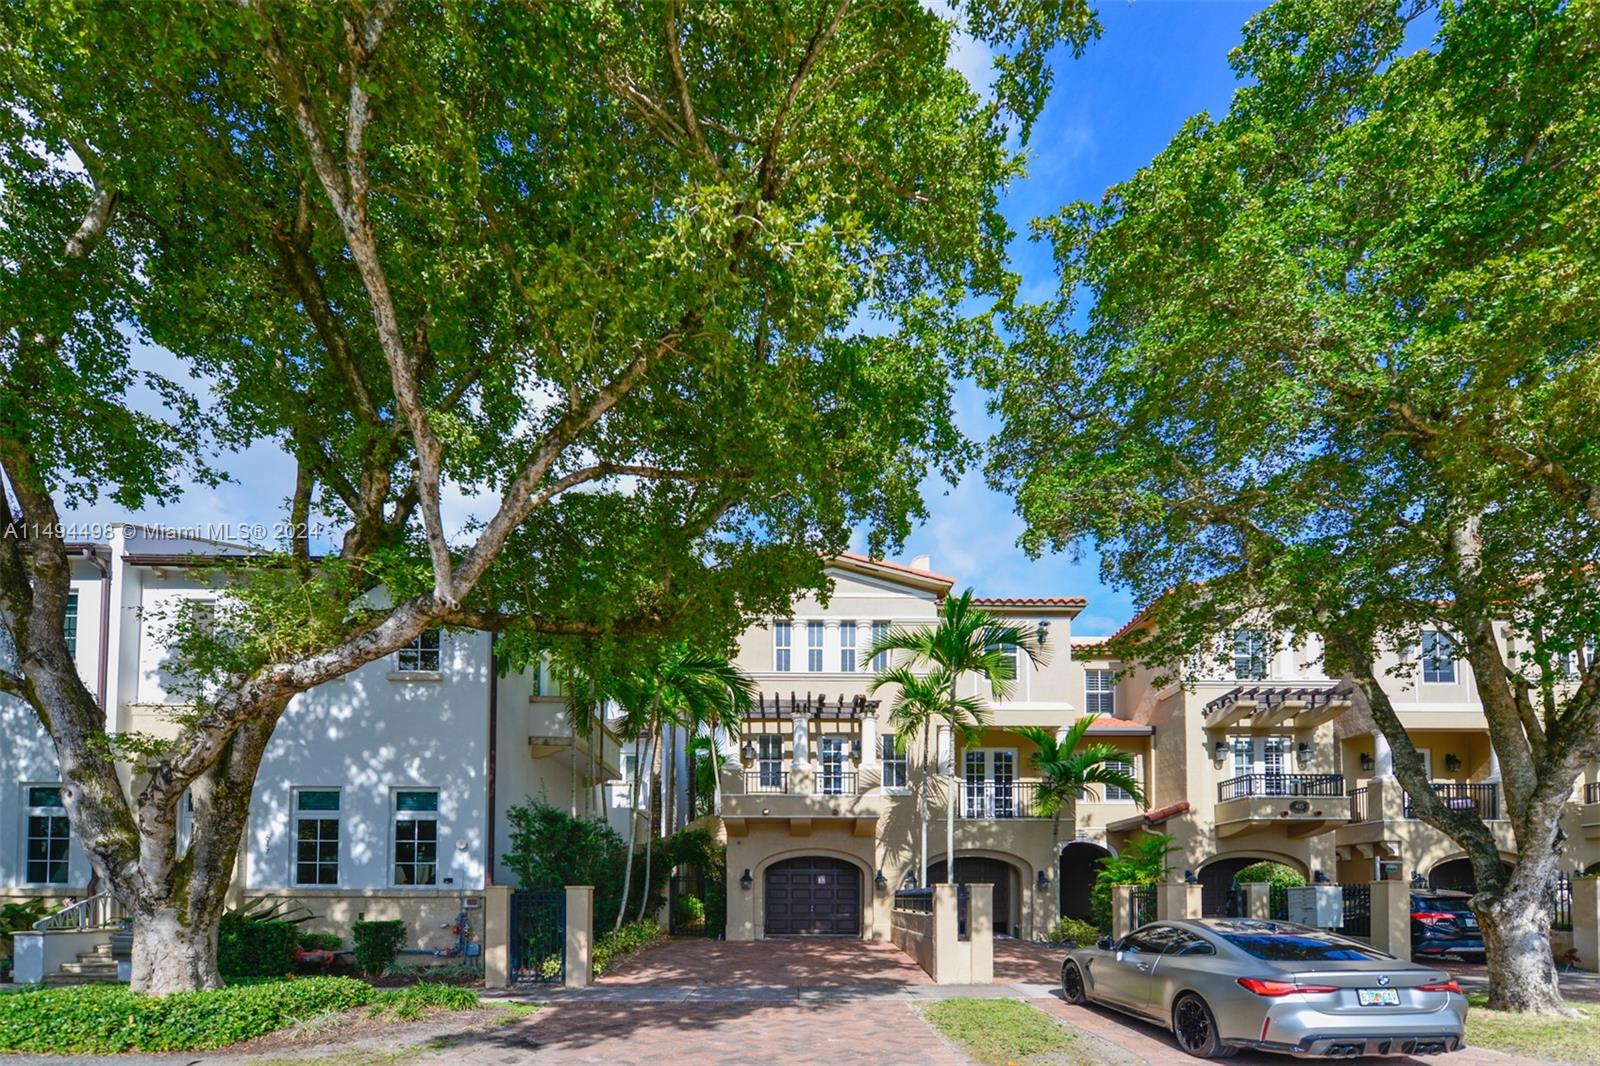 615 Santander Ave A, Coral Gables, Florida 33134, 4 Bedrooms Bedrooms, ,3 BathroomsBathrooms,Residentiallease,For Rent,615 Santander Ave A,A11494498